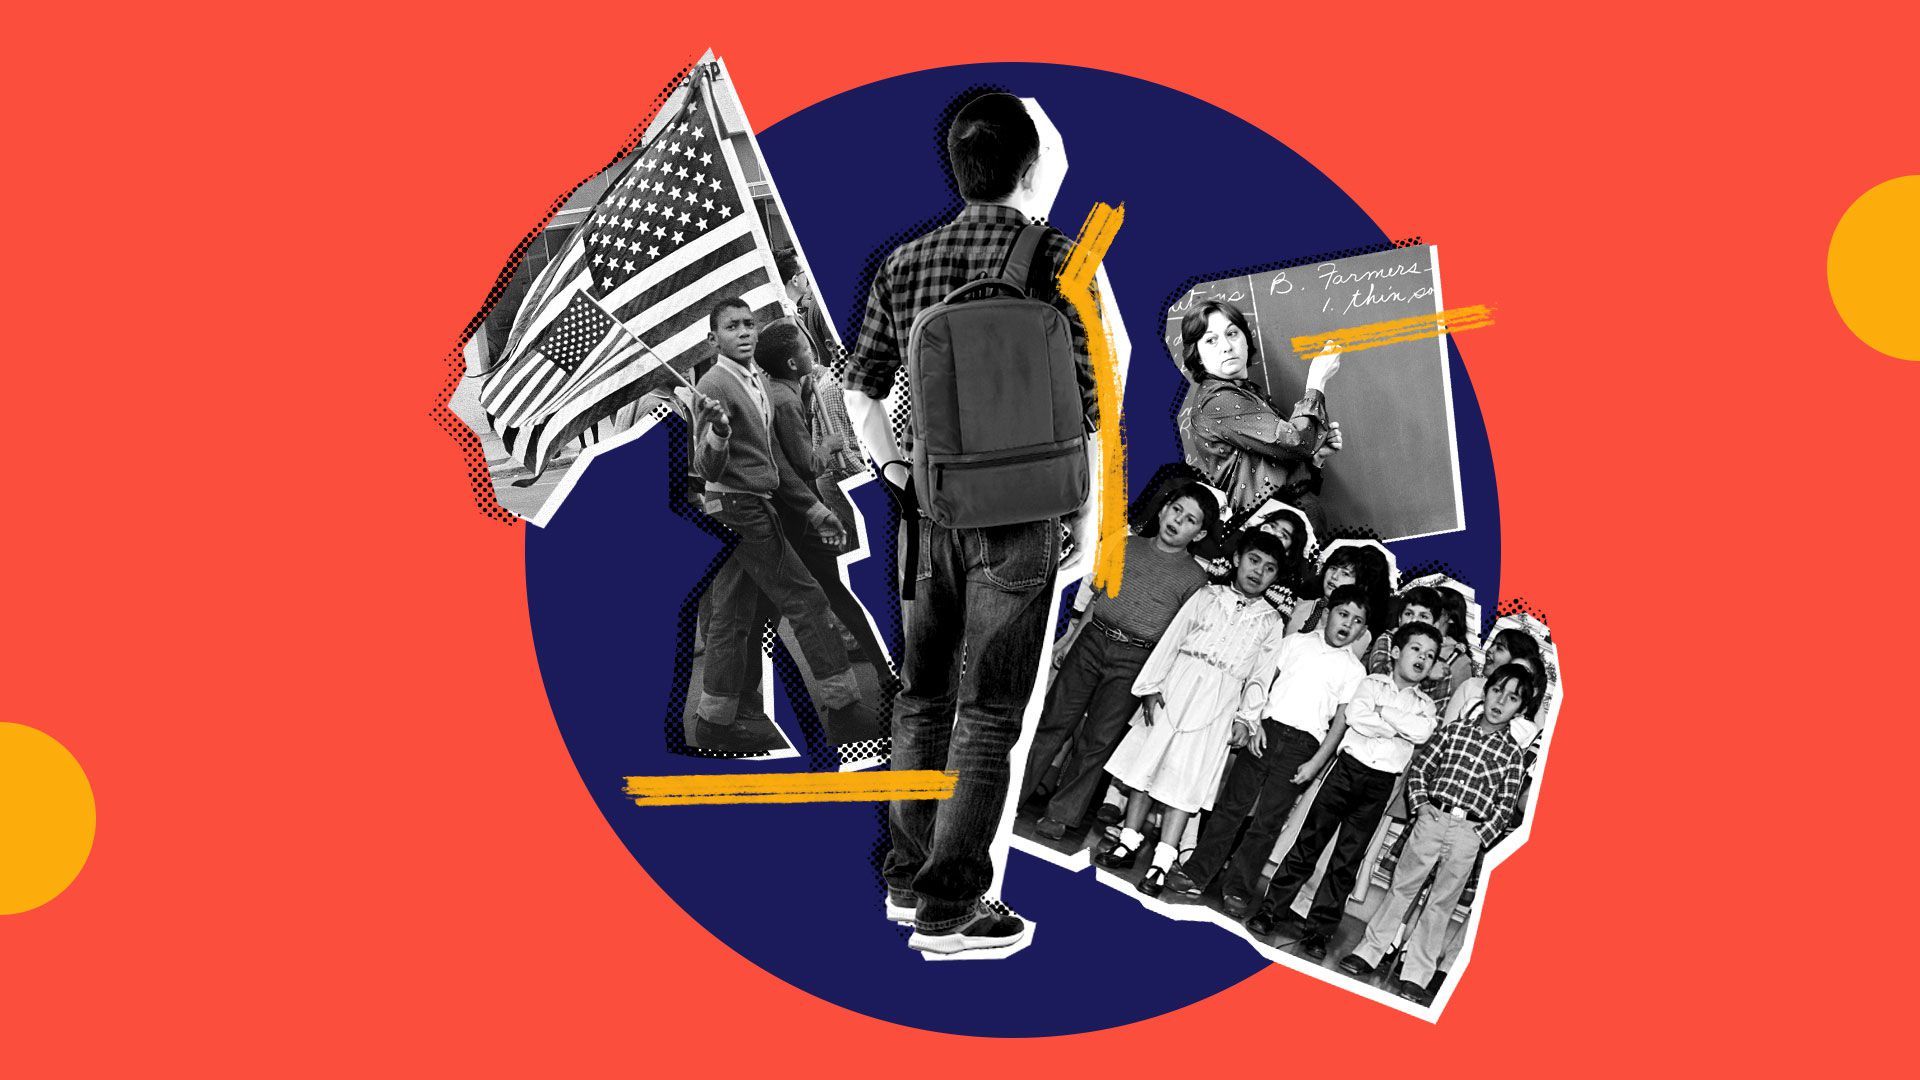 Photo illustration of children waving the US flag, singing children, student with a backpack, and teacher writing on a blackboard